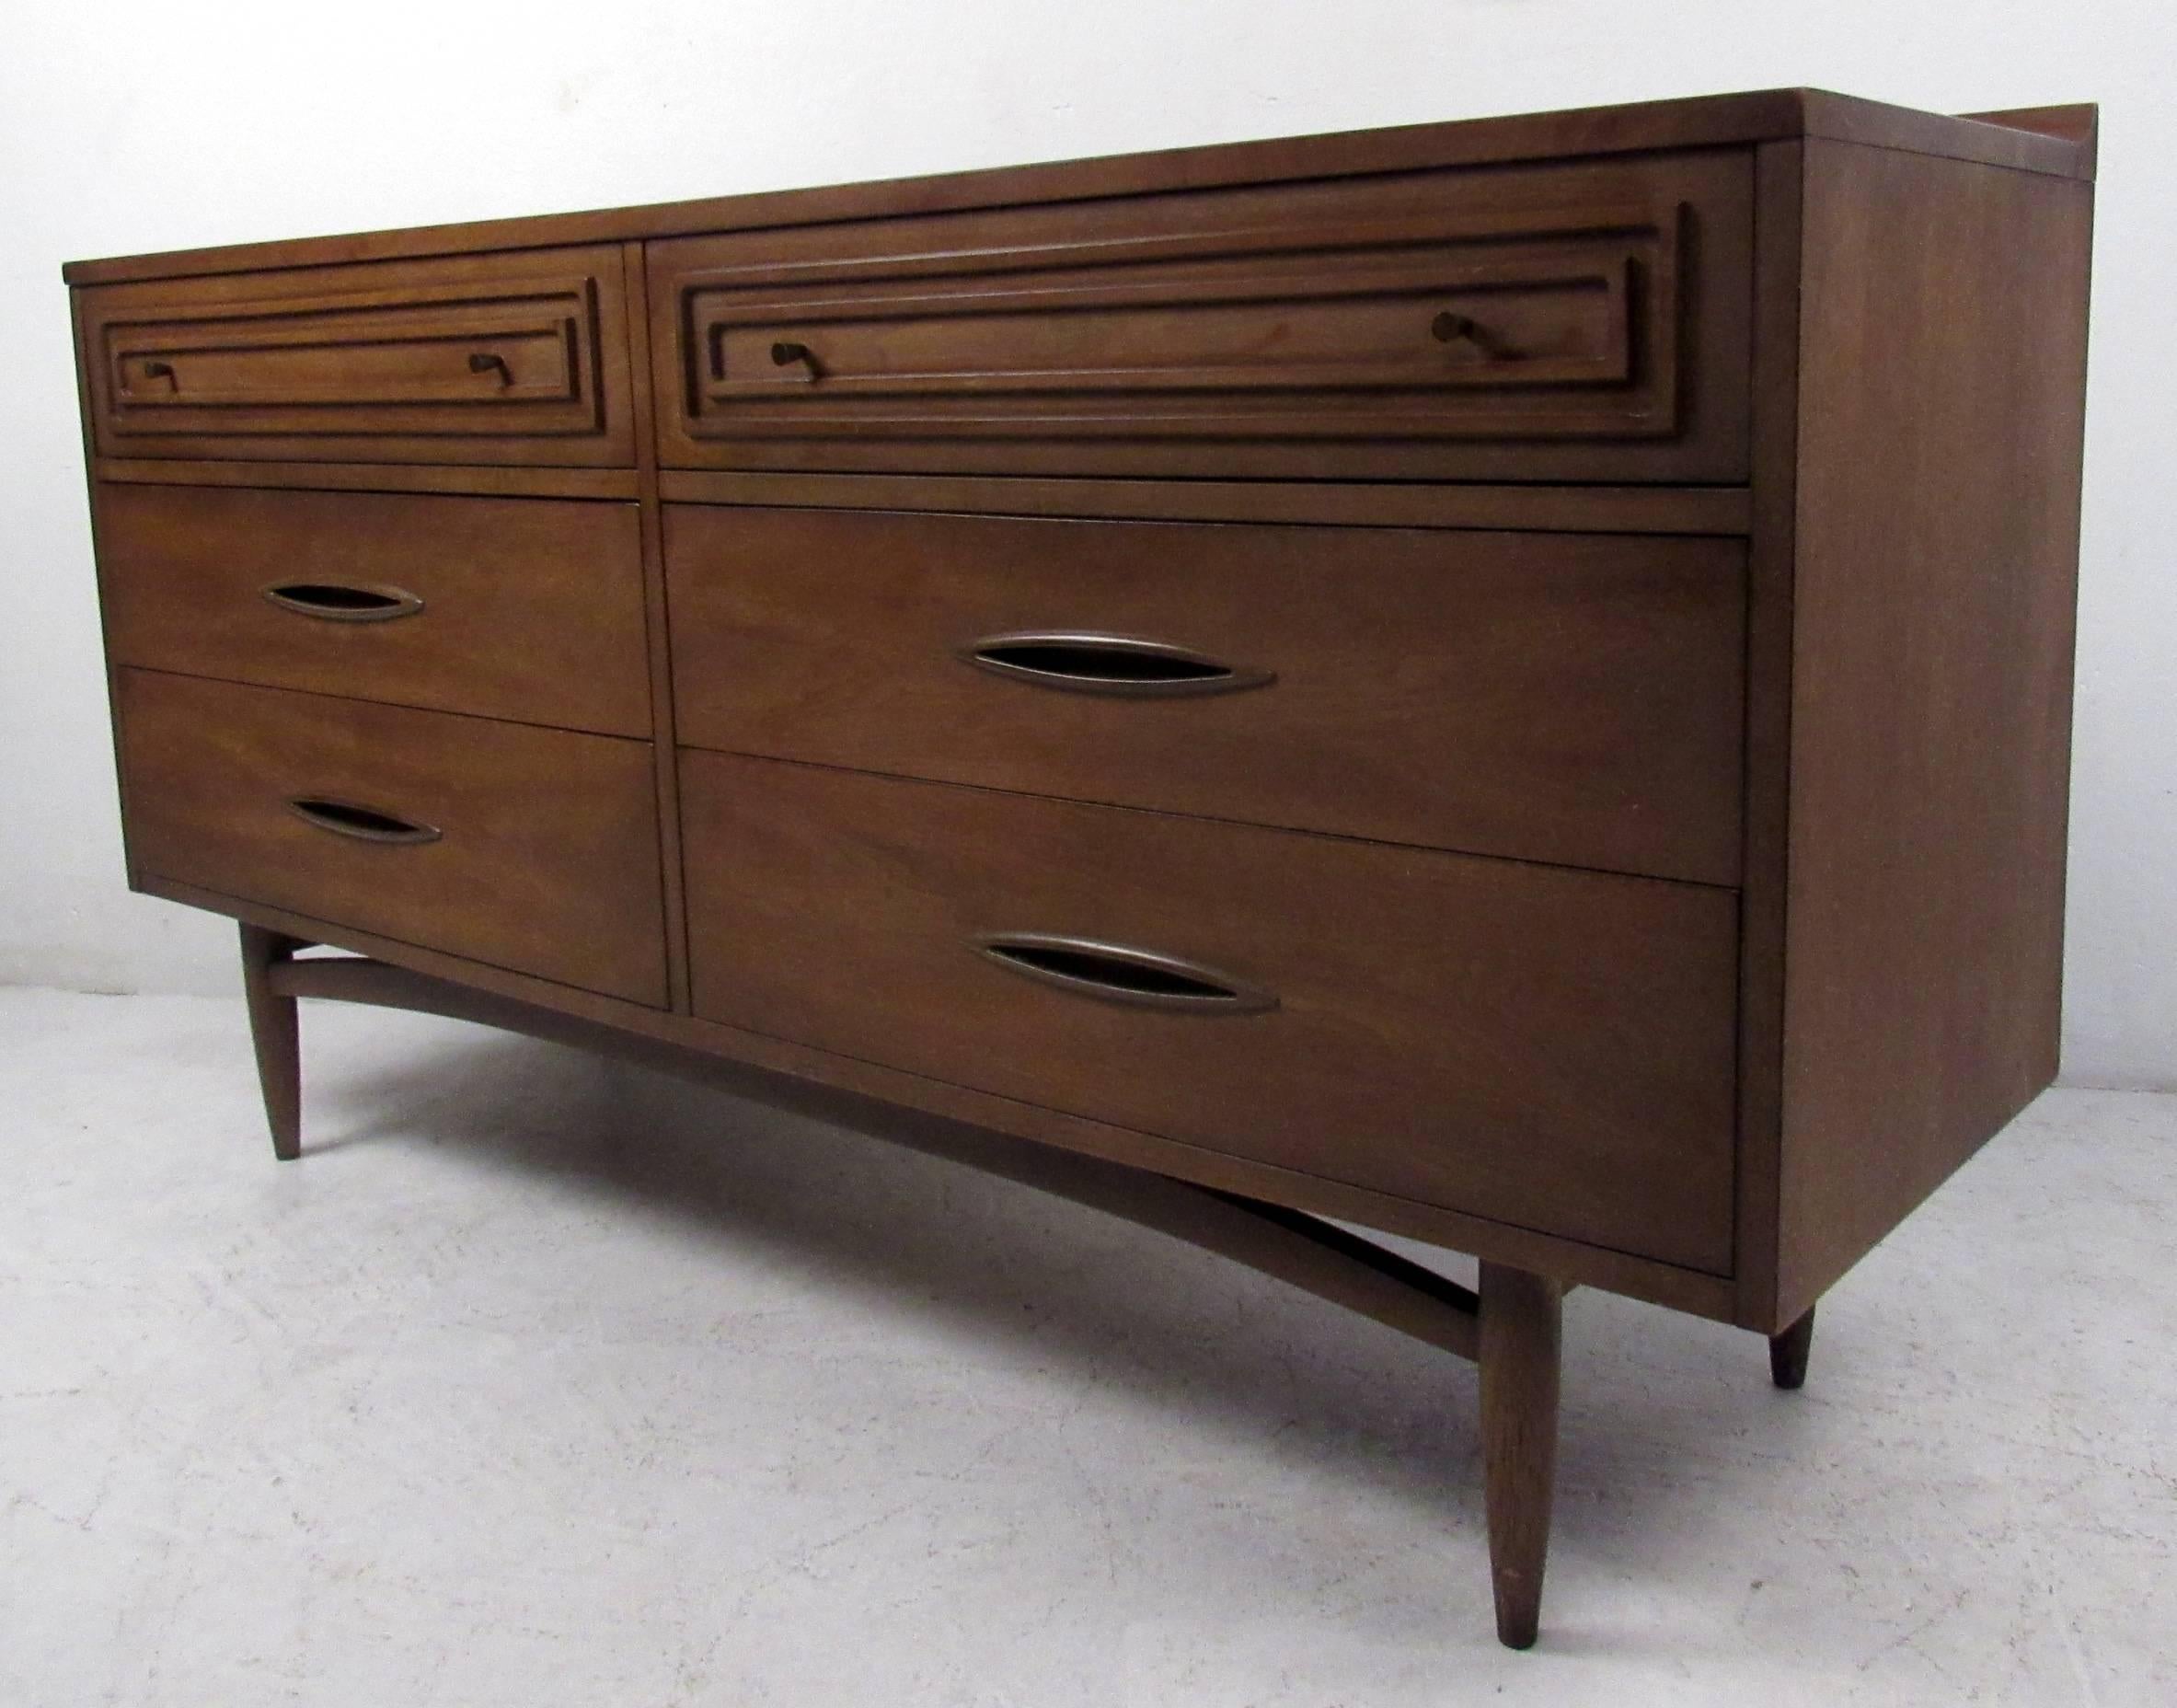 Vintage modern dresser featuring raised edge, six drawers and rich walnut grain throughout, manufactured by Broyhill. This well made case piece boasts oval recessed drawer pulls, a sculpted base, and tapered legs. A stylish mid-century dresser that